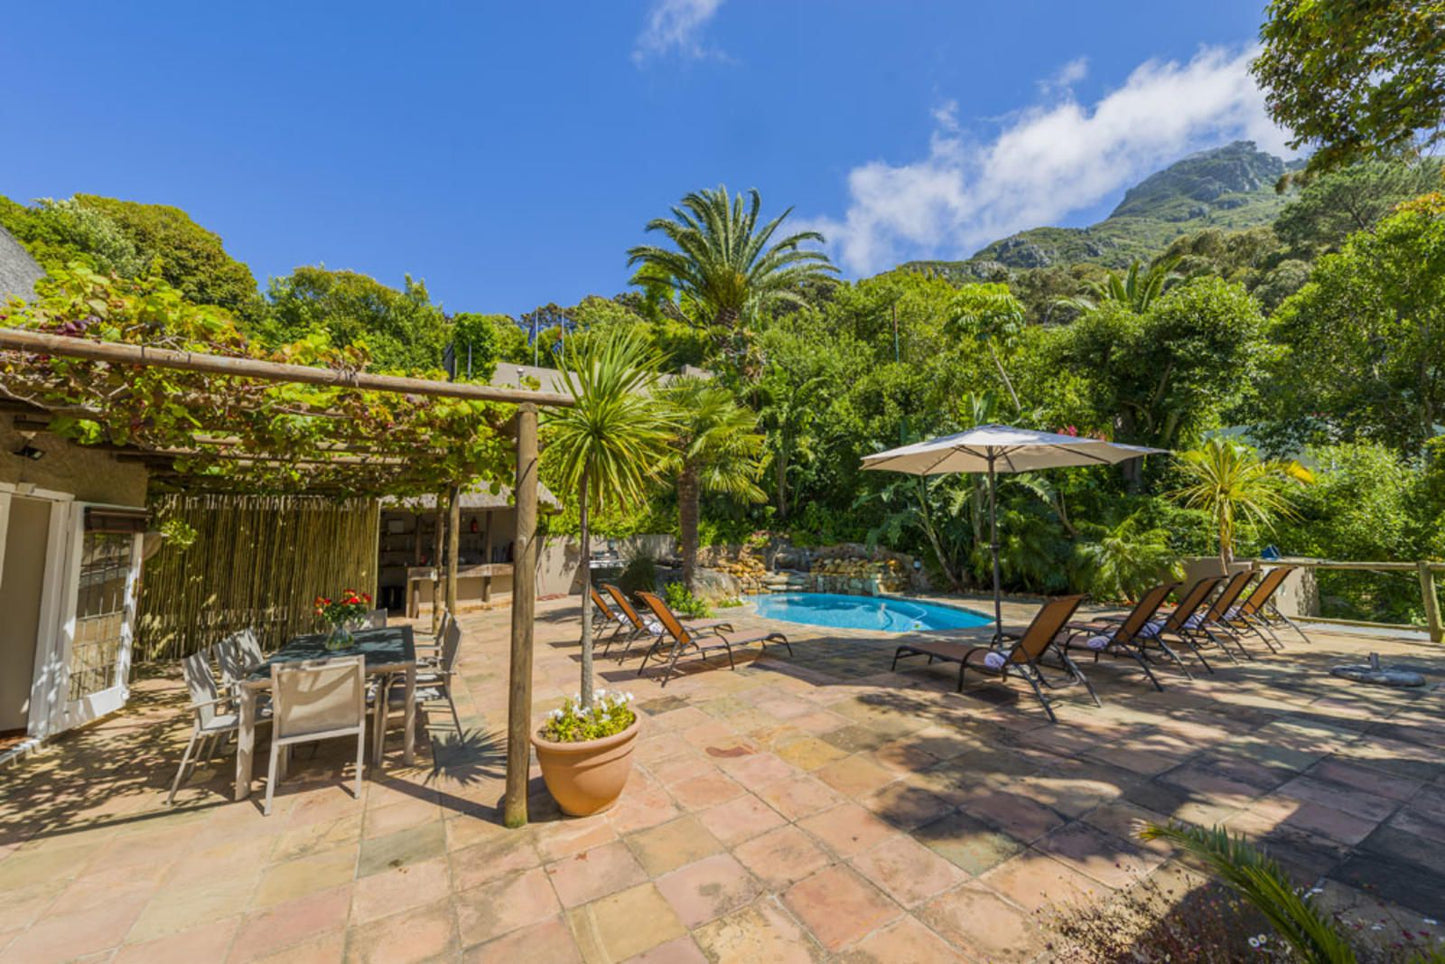 Ikhaya Safari Lodge Constantia Cape Town Western Cape South Africa Complementary Colors, Palm Tree, Plant, Nature, Wood, Swimming Pool